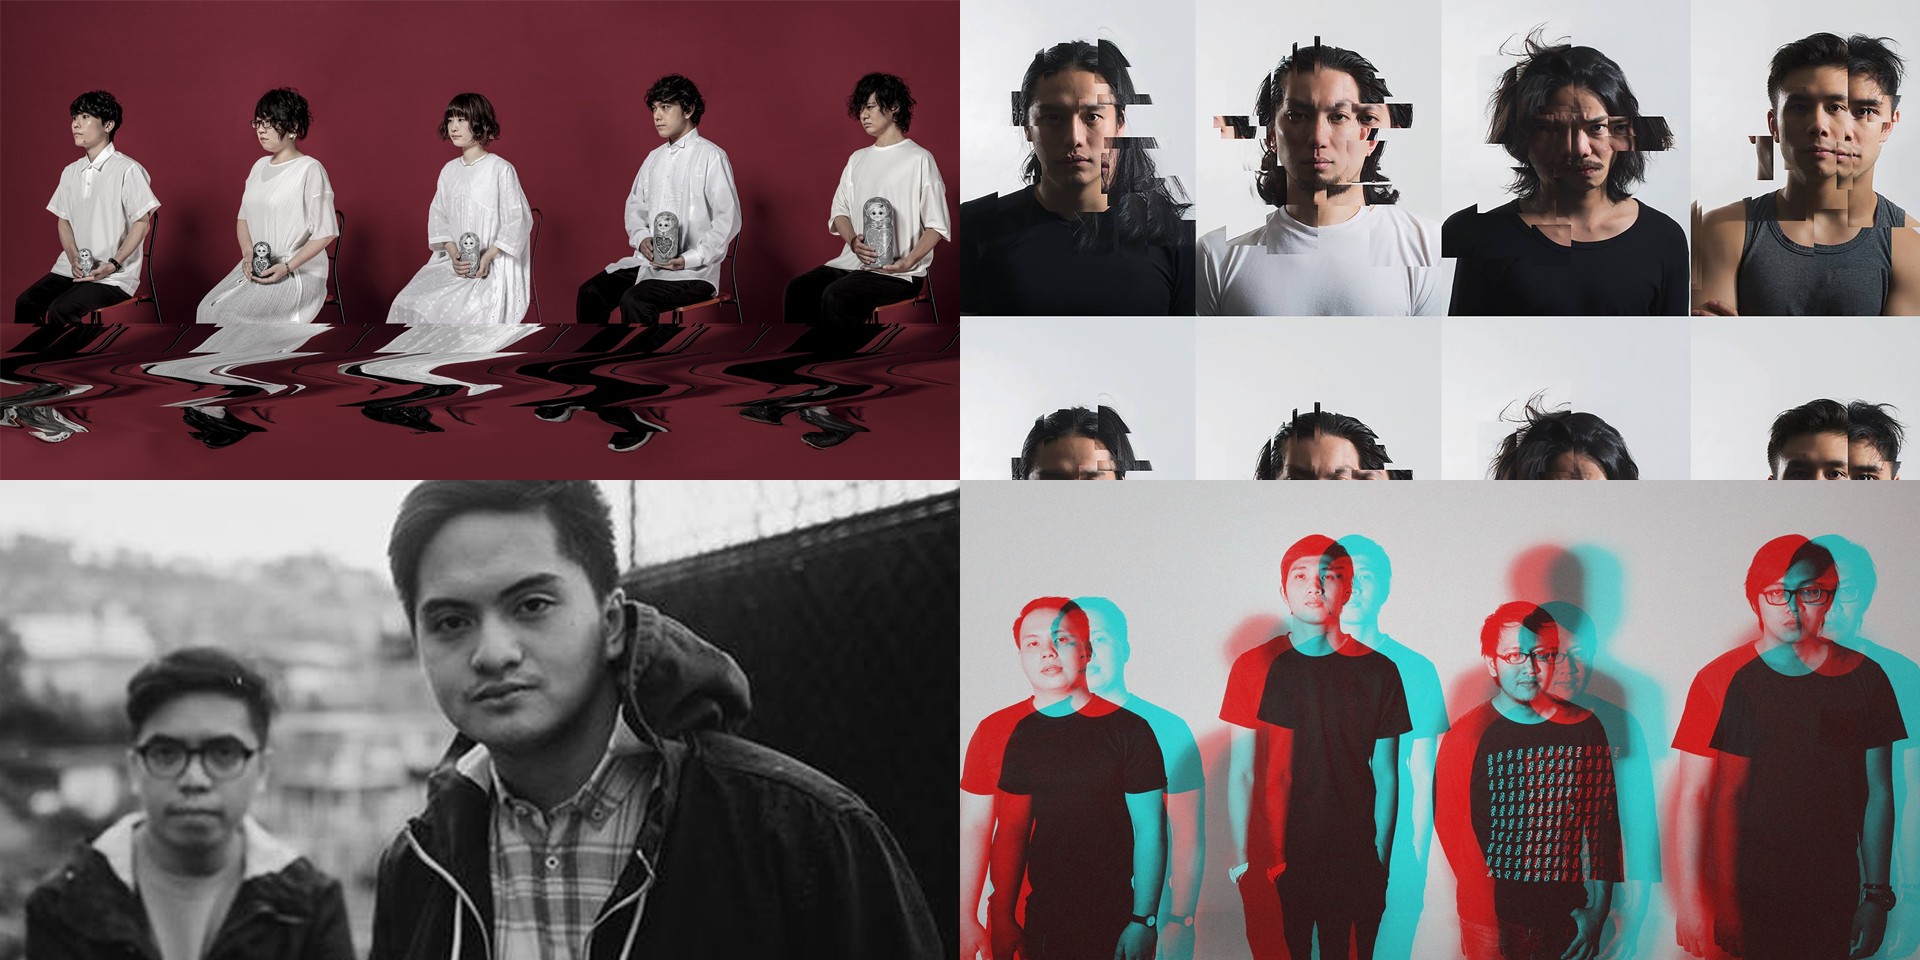 JYOCHO, tfvsjs, Degs and Gabba, tide/edit, and more to perform at FIERE 2019